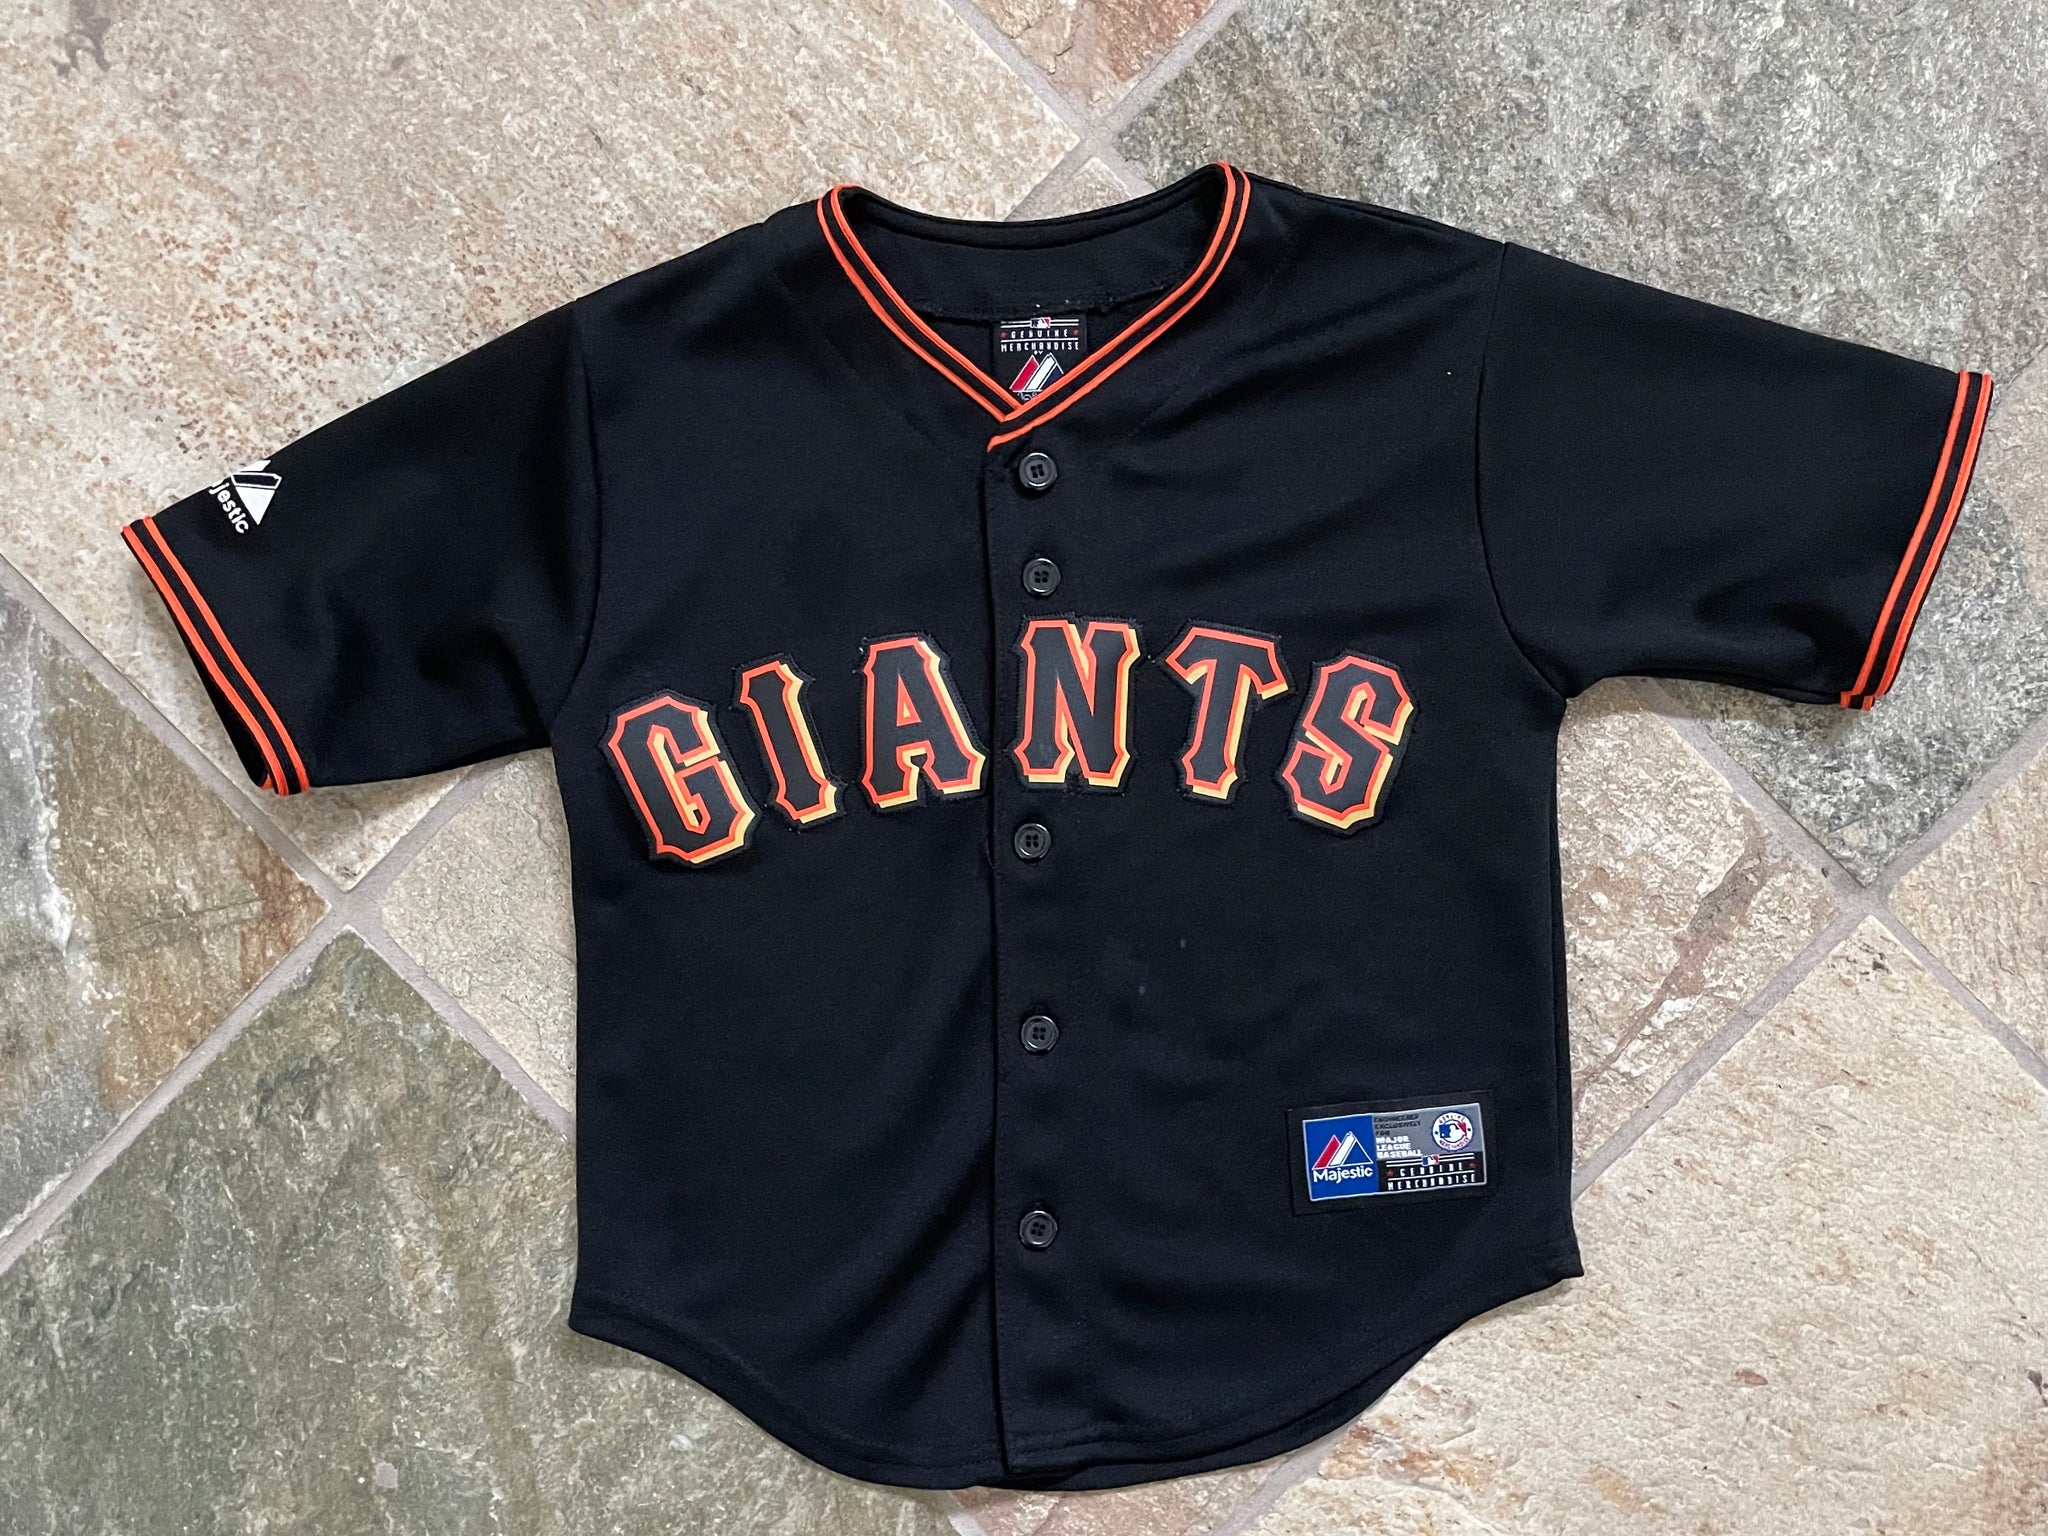 Majestic, Tops, San Francisco Giants Jersey Black With Orange Size Small